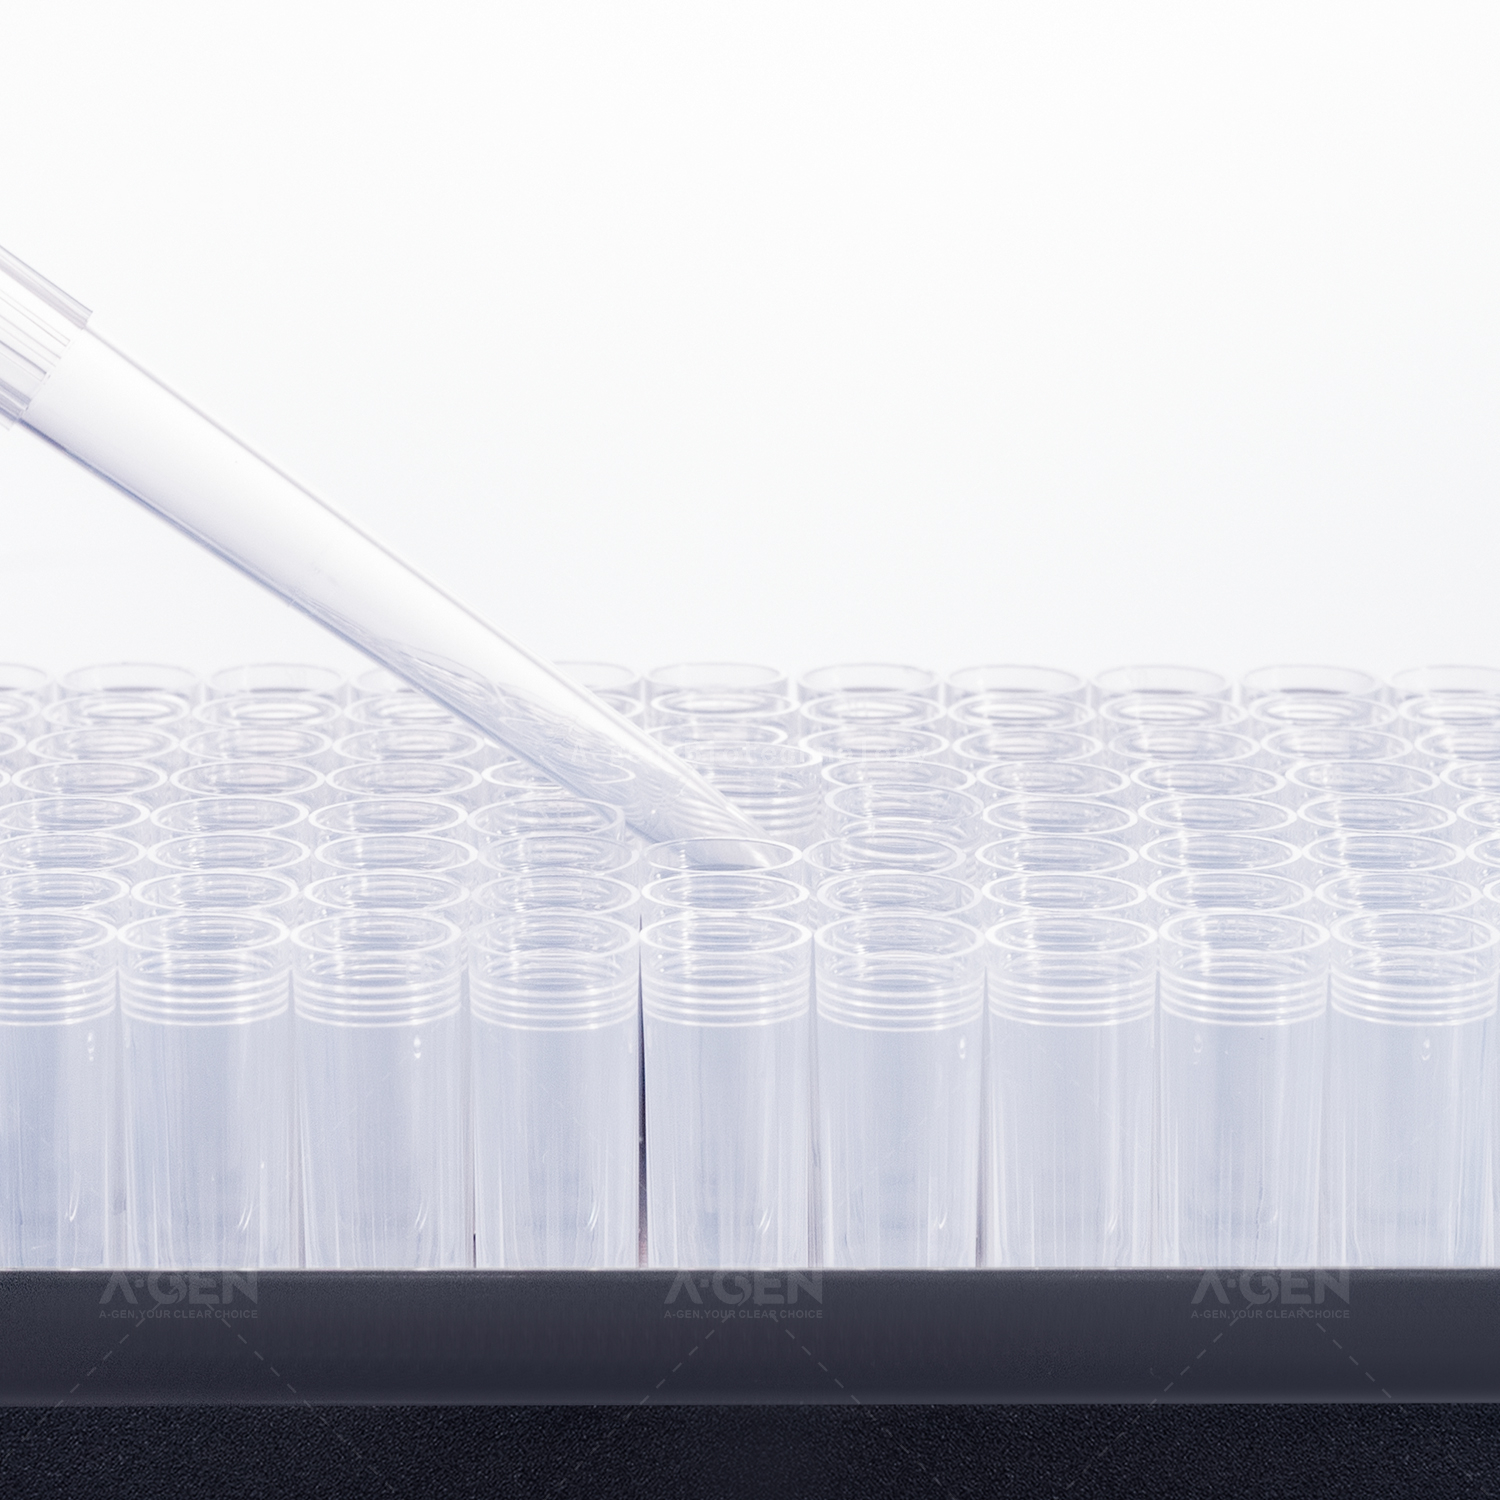 Opentrons Pipette Tip Clear 1000μL PP Pipette Tip (Racked,sterile) for Liquid Transfer Without Filter OPT-1000-RSL Low Retention Is Optional